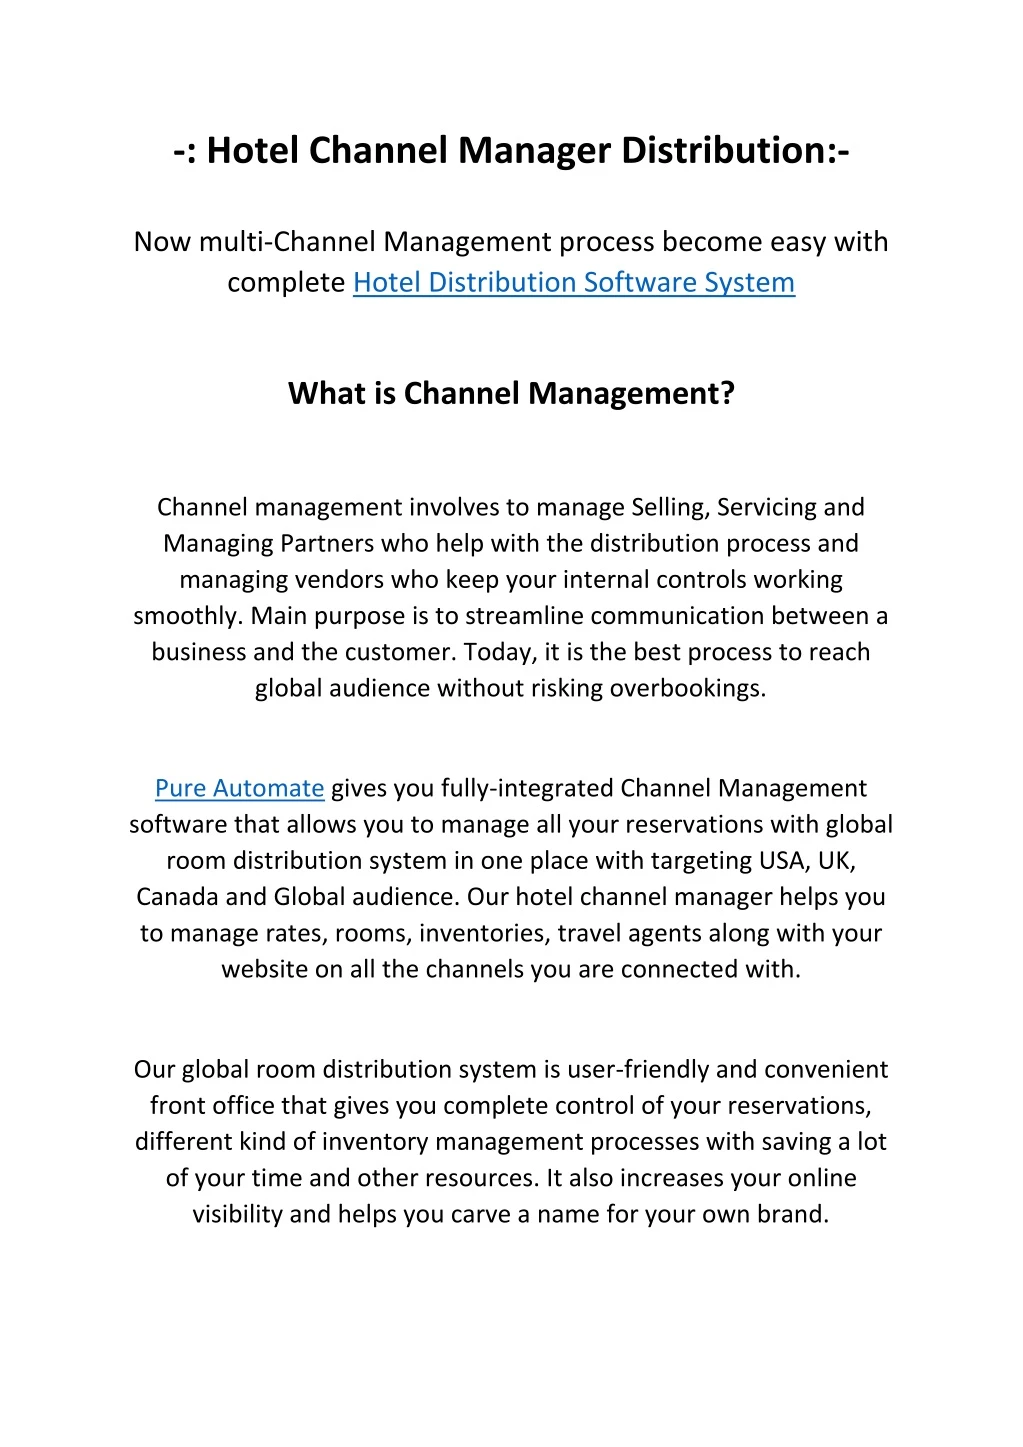 hotel channel manager distribution